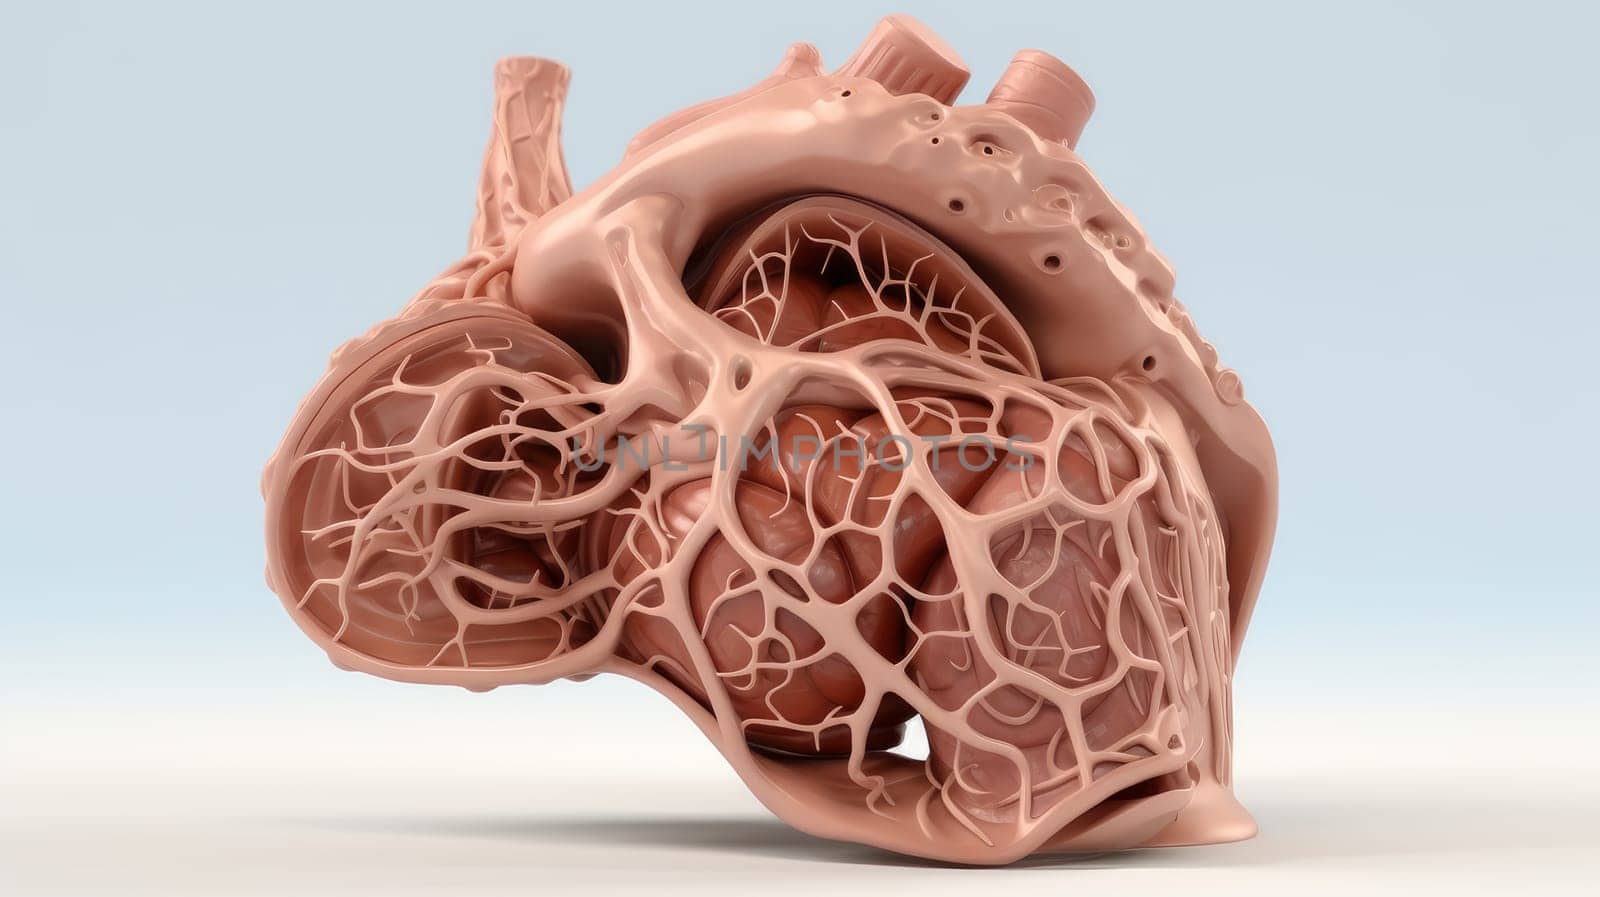 Anatomical model of the human body and organs. Part of a human body model with organ system. Medical education concept. by Alla_Yurtayeva